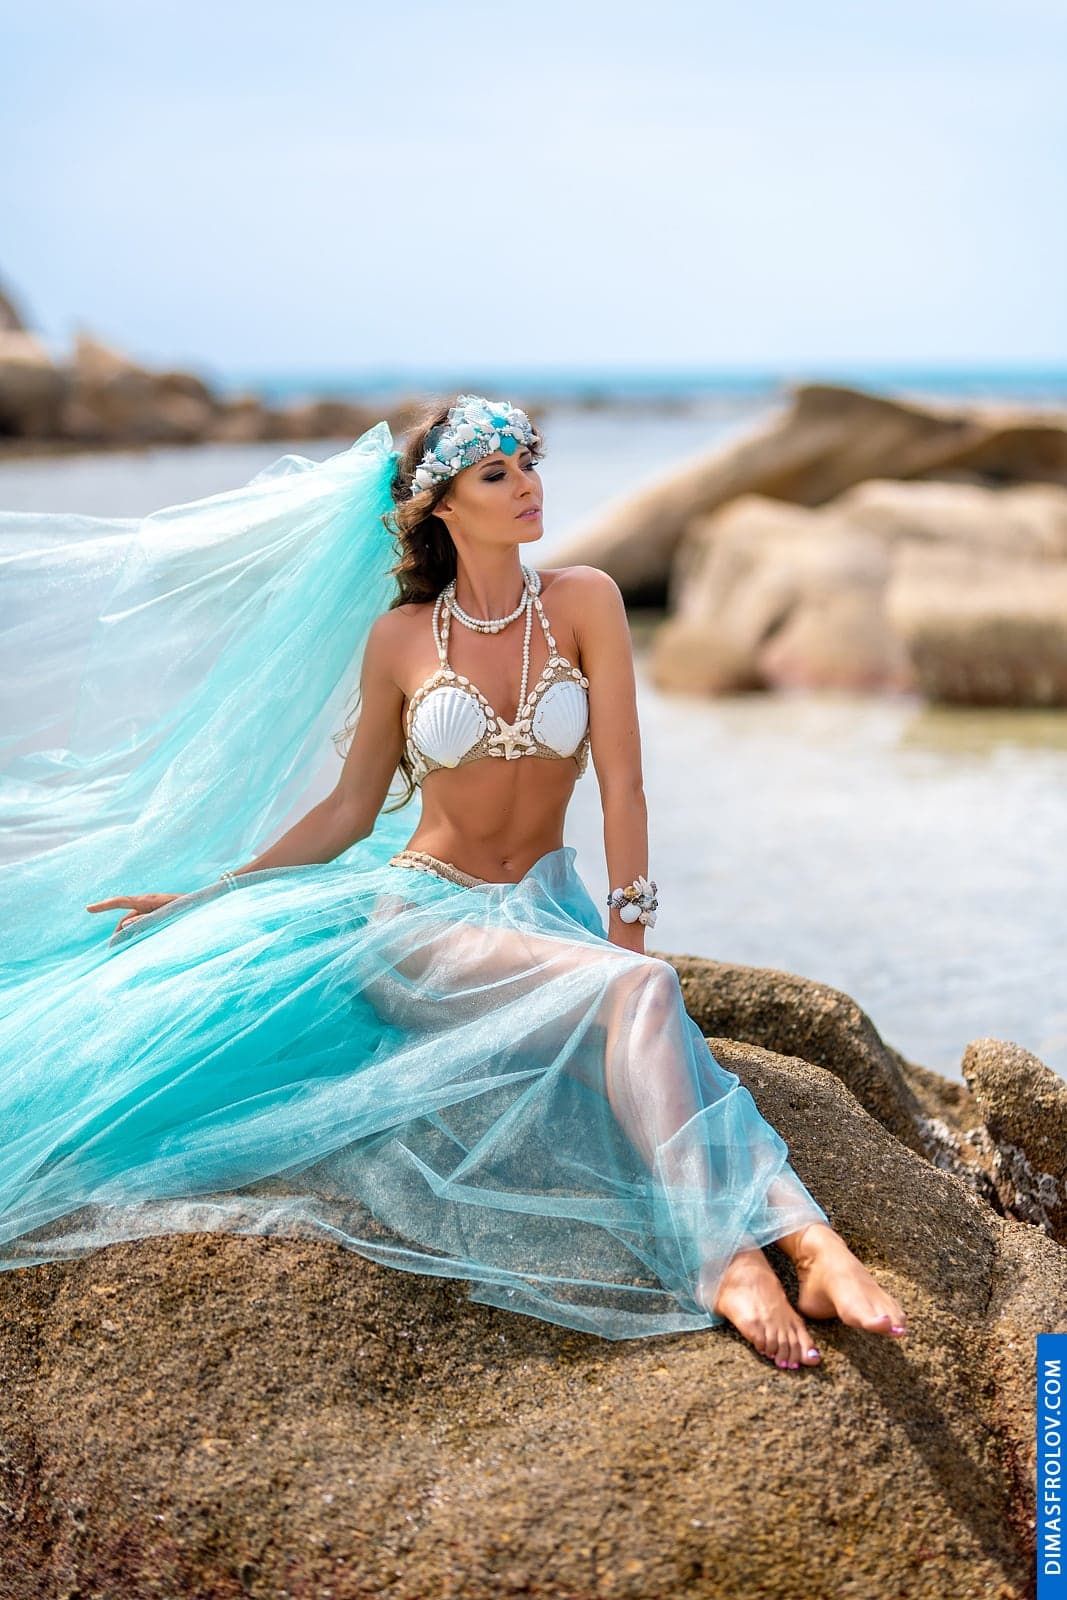 Unique shell accessories for a themed photo shoot on Koh Samui. photographer Dimas Frolov. photo1609